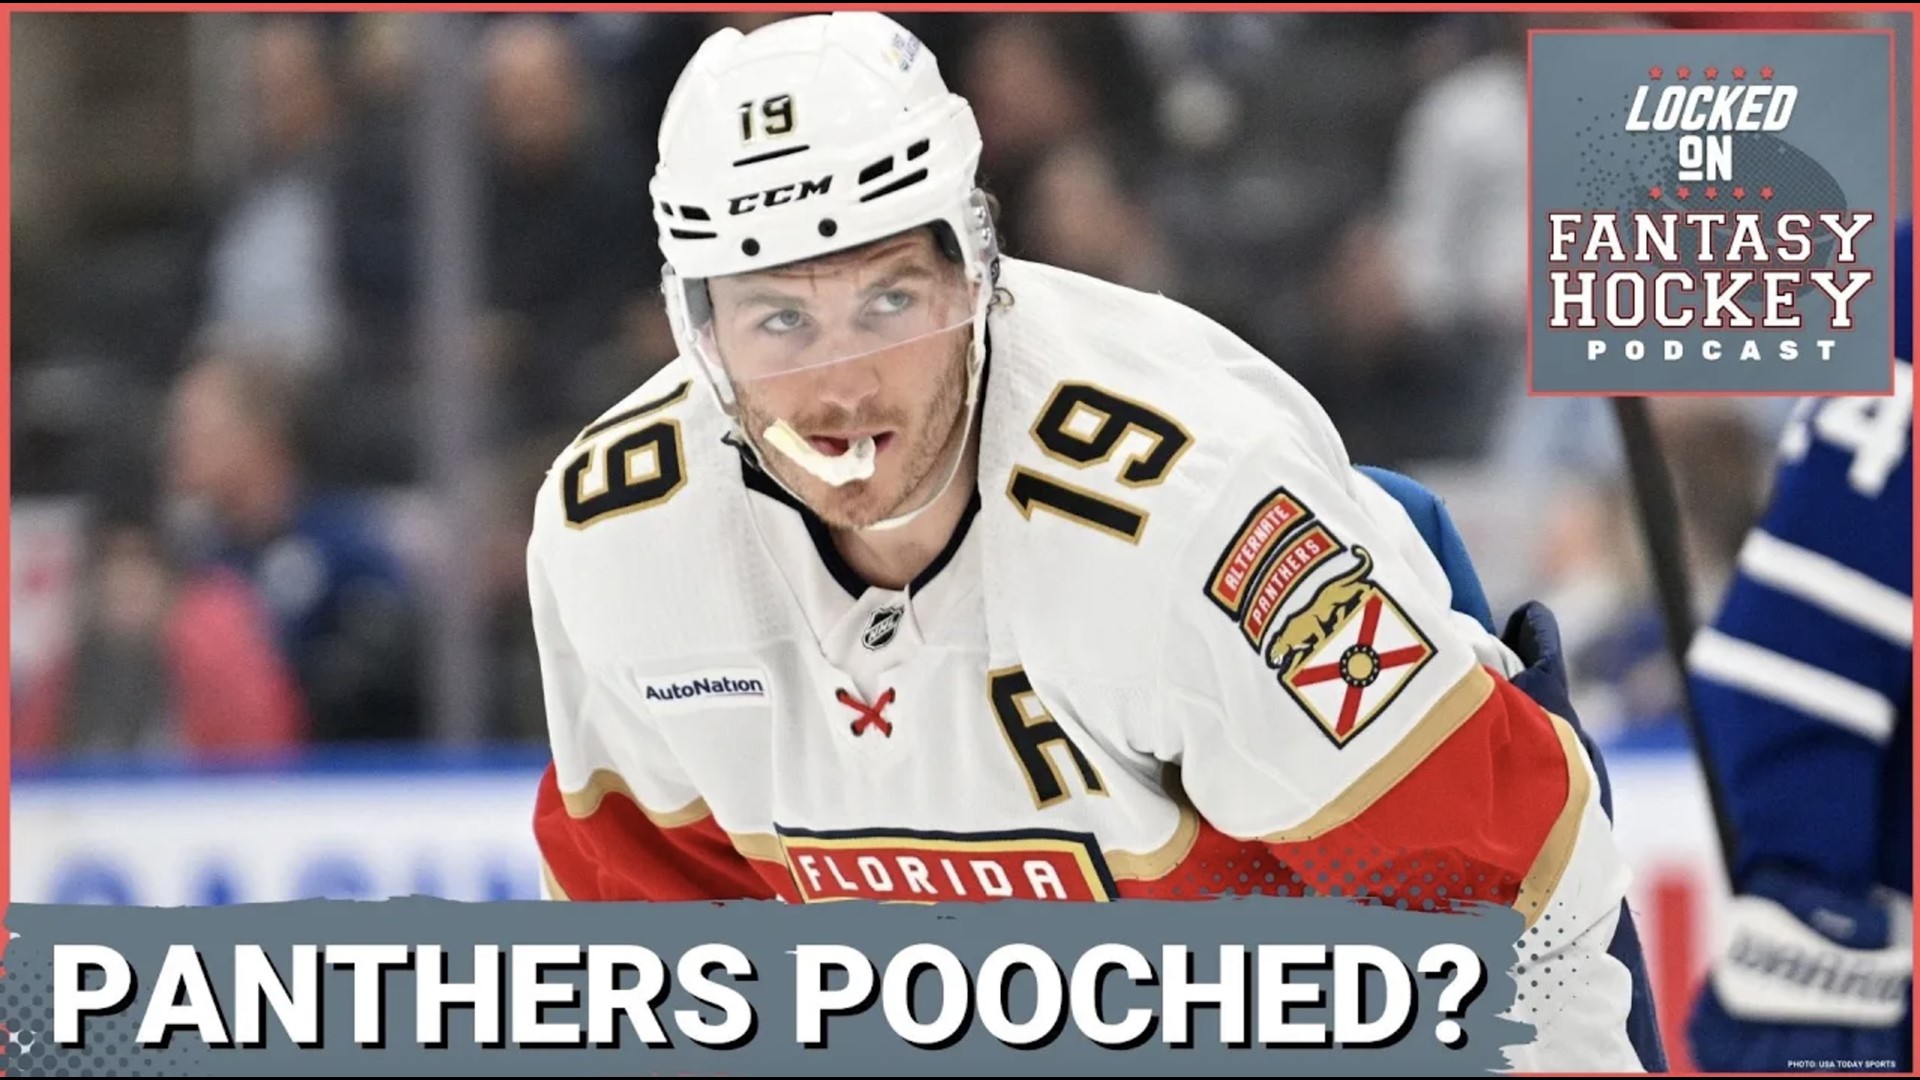 With no shortage of spicy NHL and fantasy hockey angles to cover this week, Wednesday's episode is loaded with all of the news you need to know